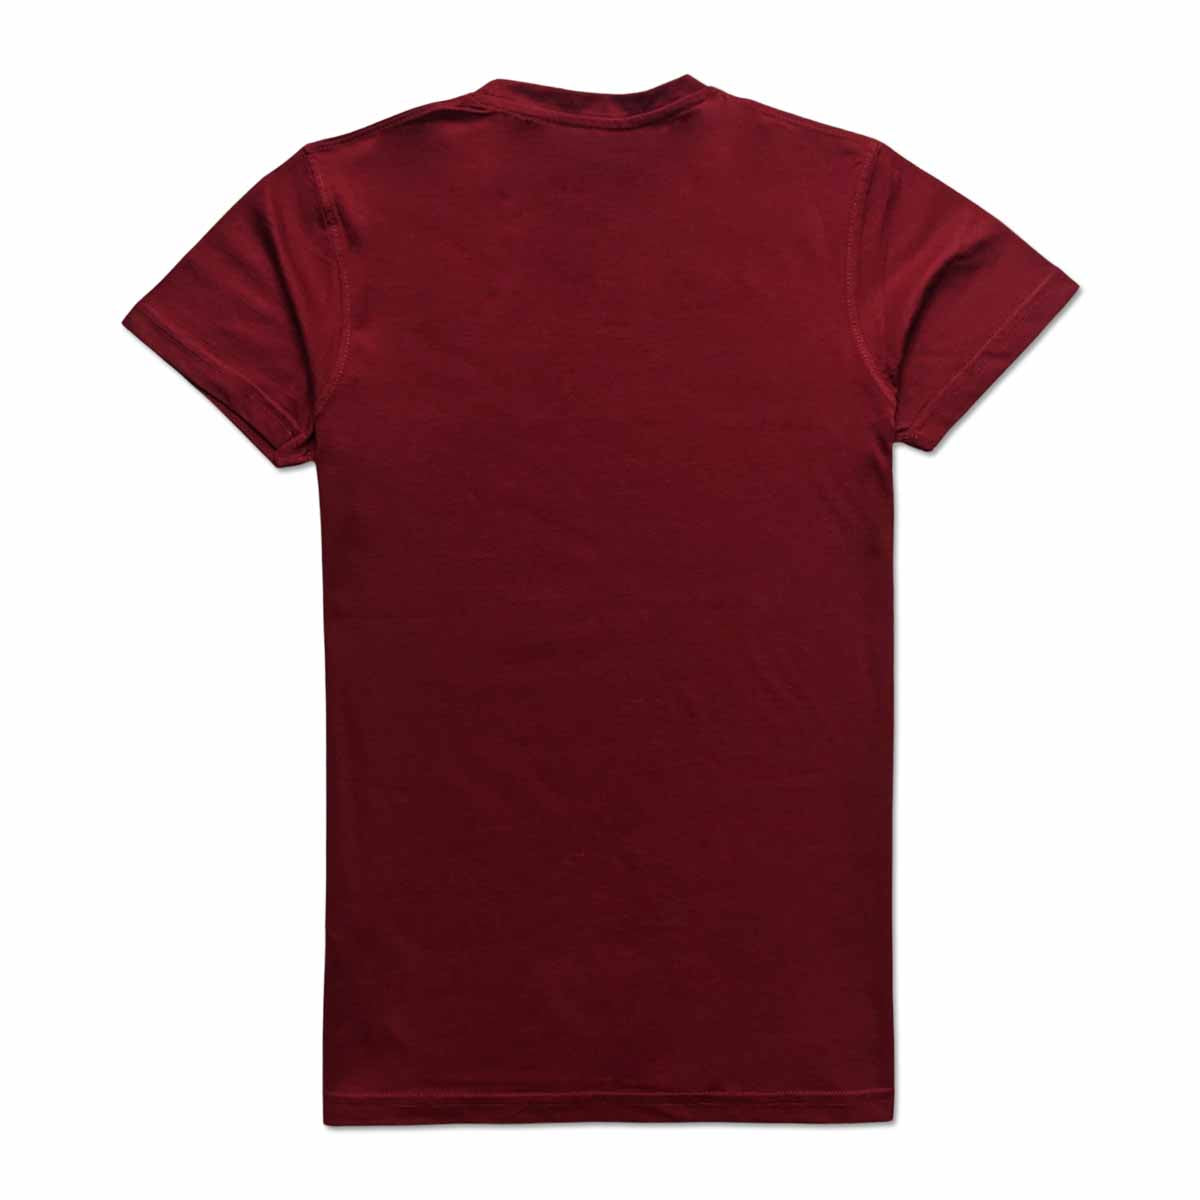 Brand Expo Premium Quality Branded T-Shirts for Men's